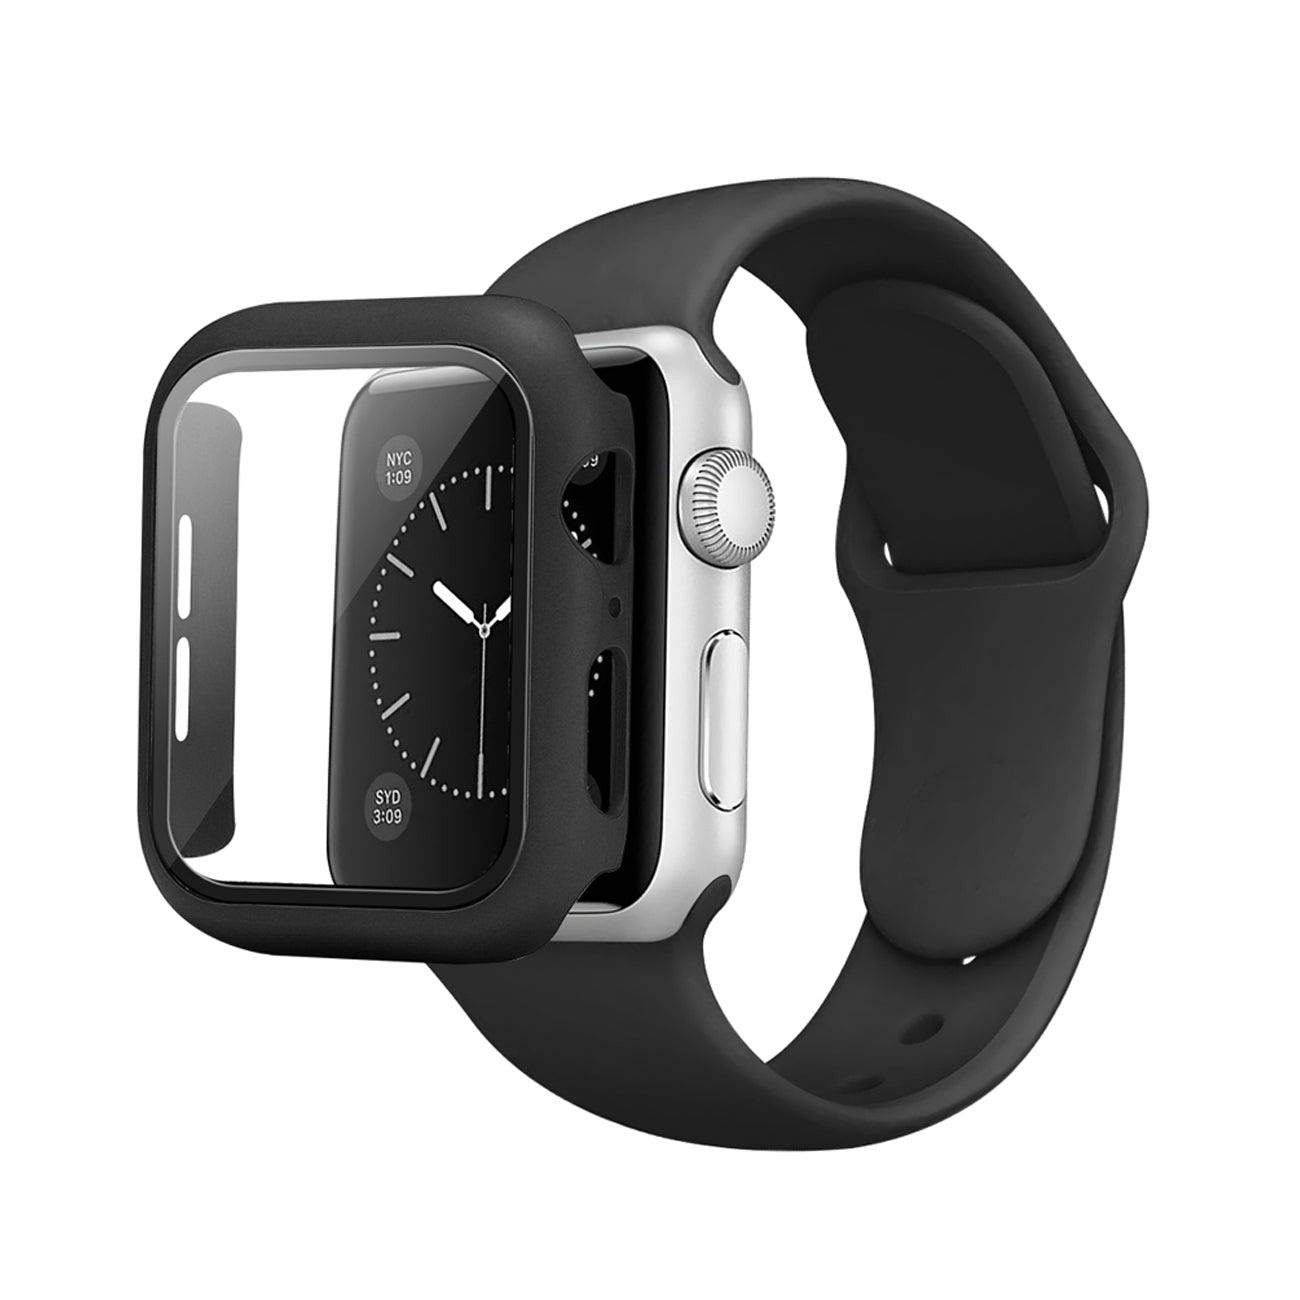 Watch Case PC With Glass Screen Protector, Silicone Watch Band Apple Watch 42mm Black Color